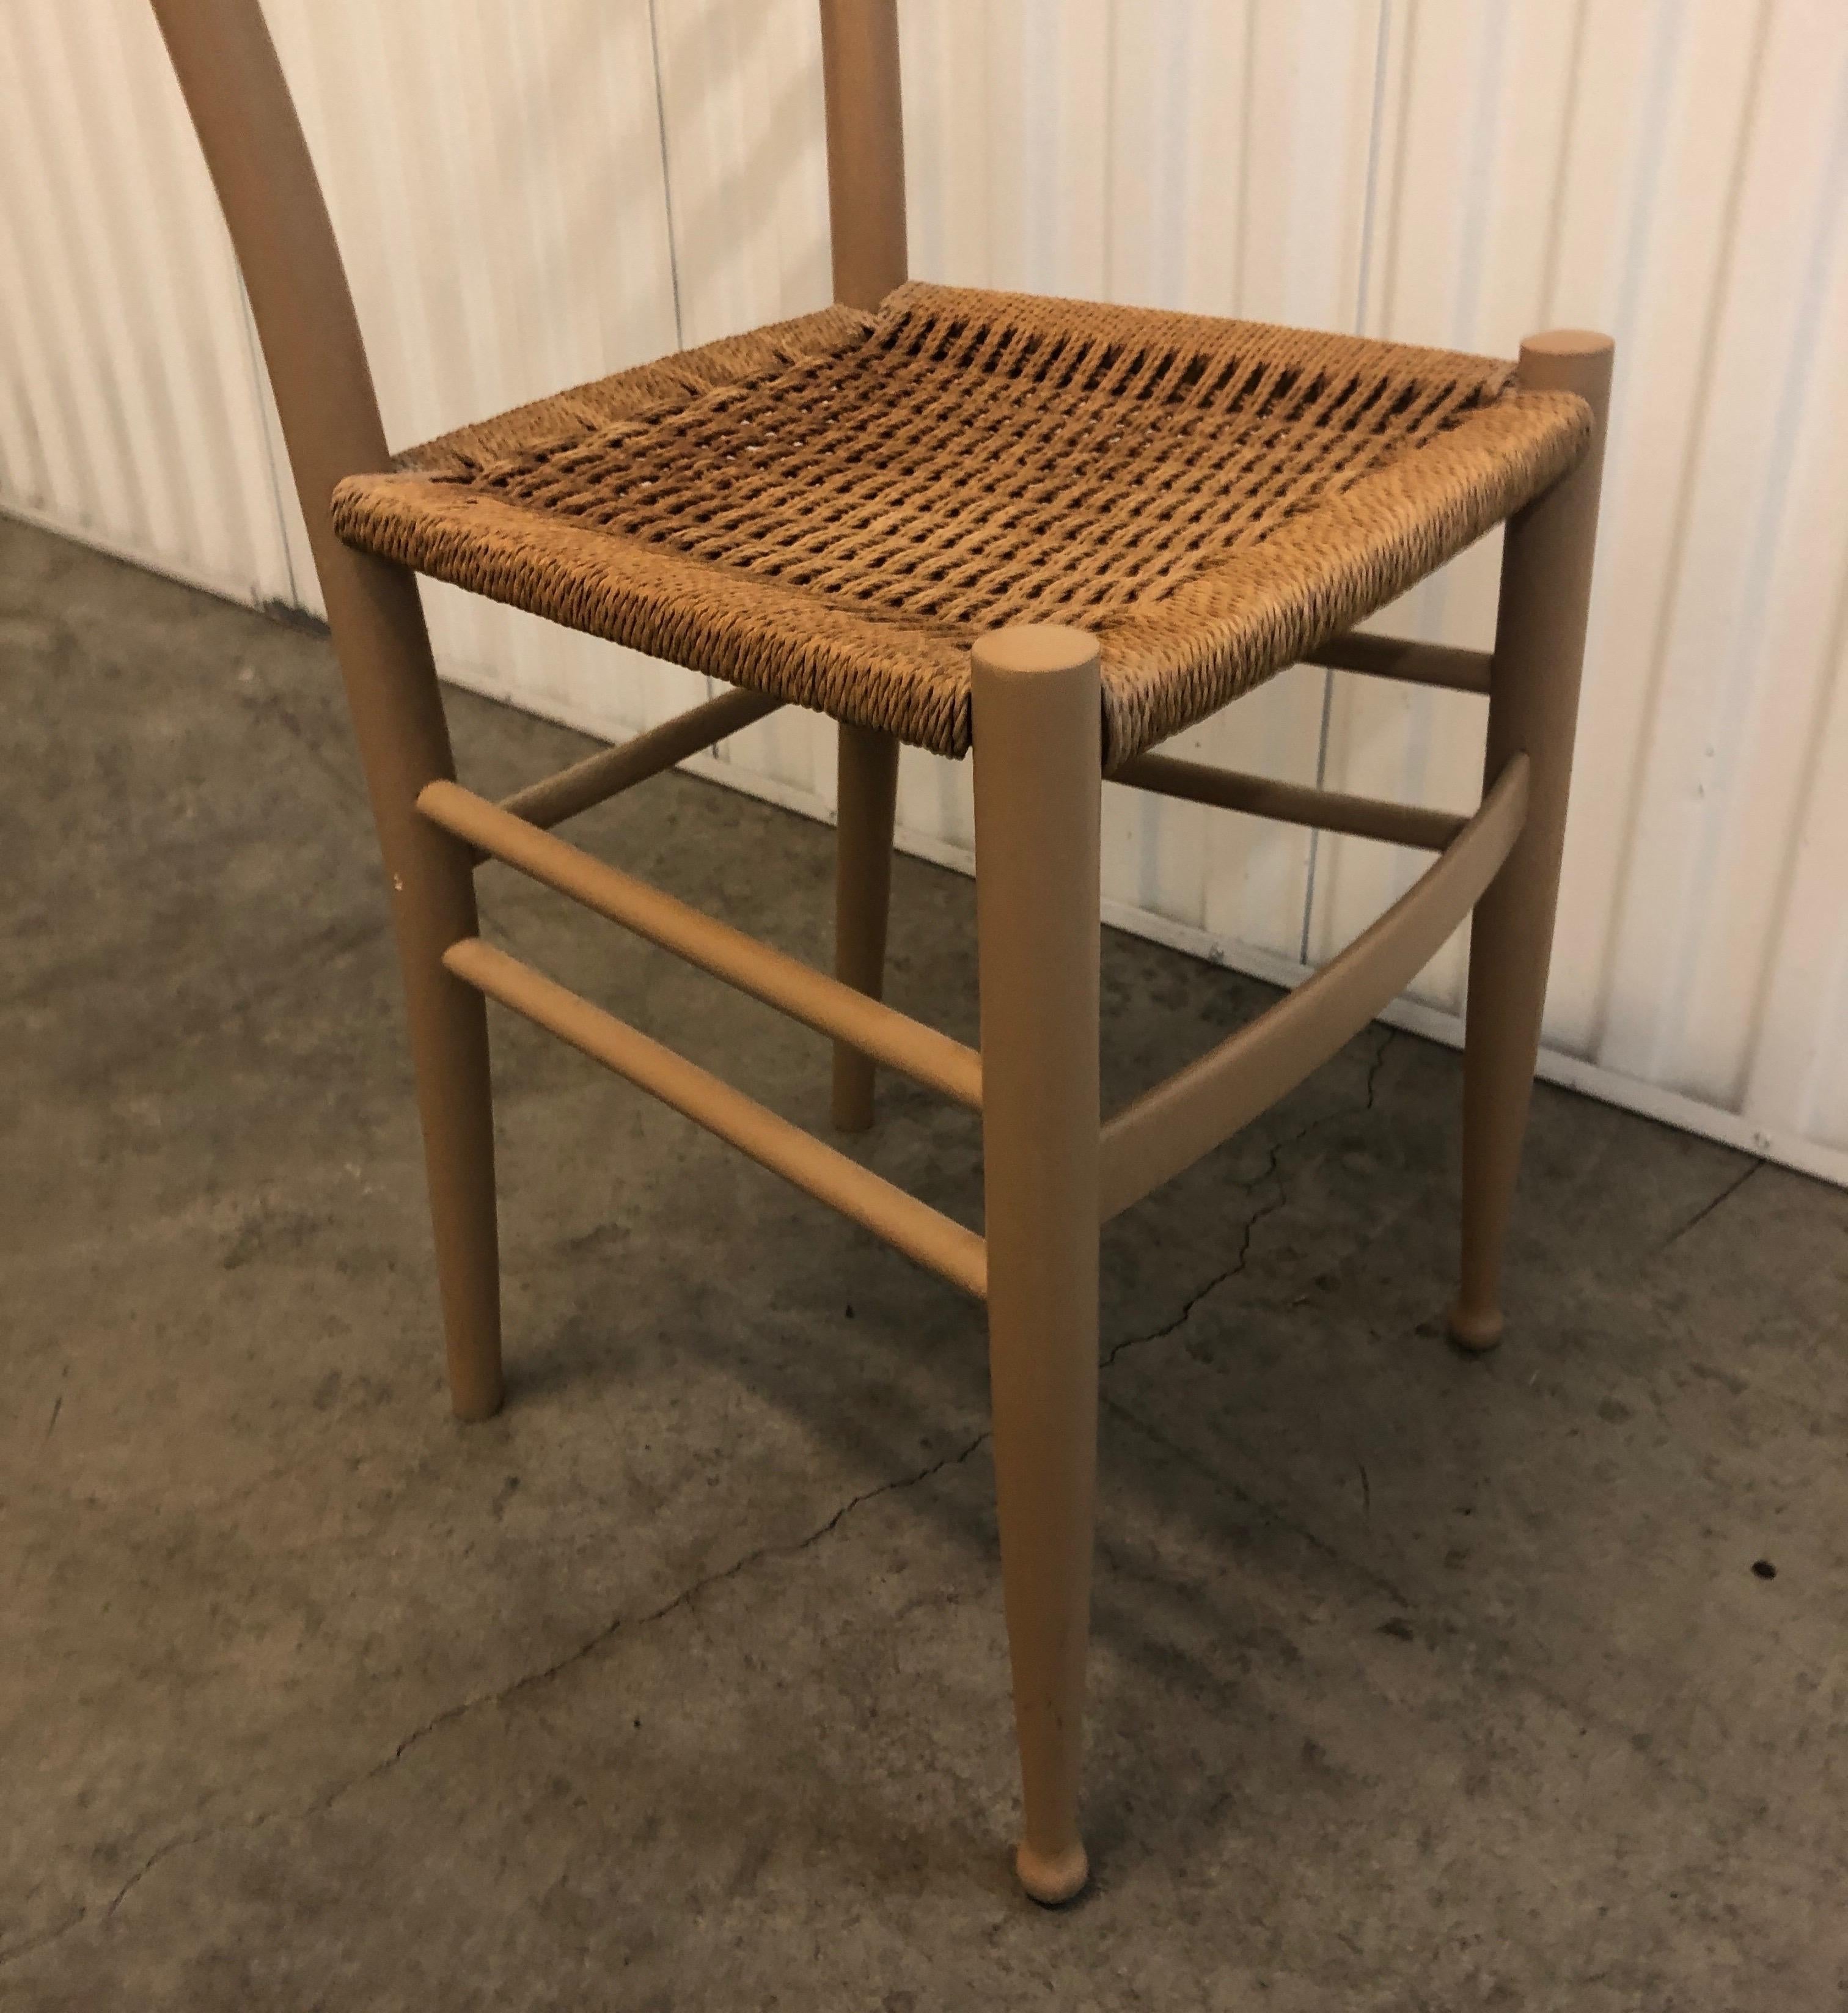 Mid-Century Modern Italian Painted Side Chair with Woven Seat and Ladder Back